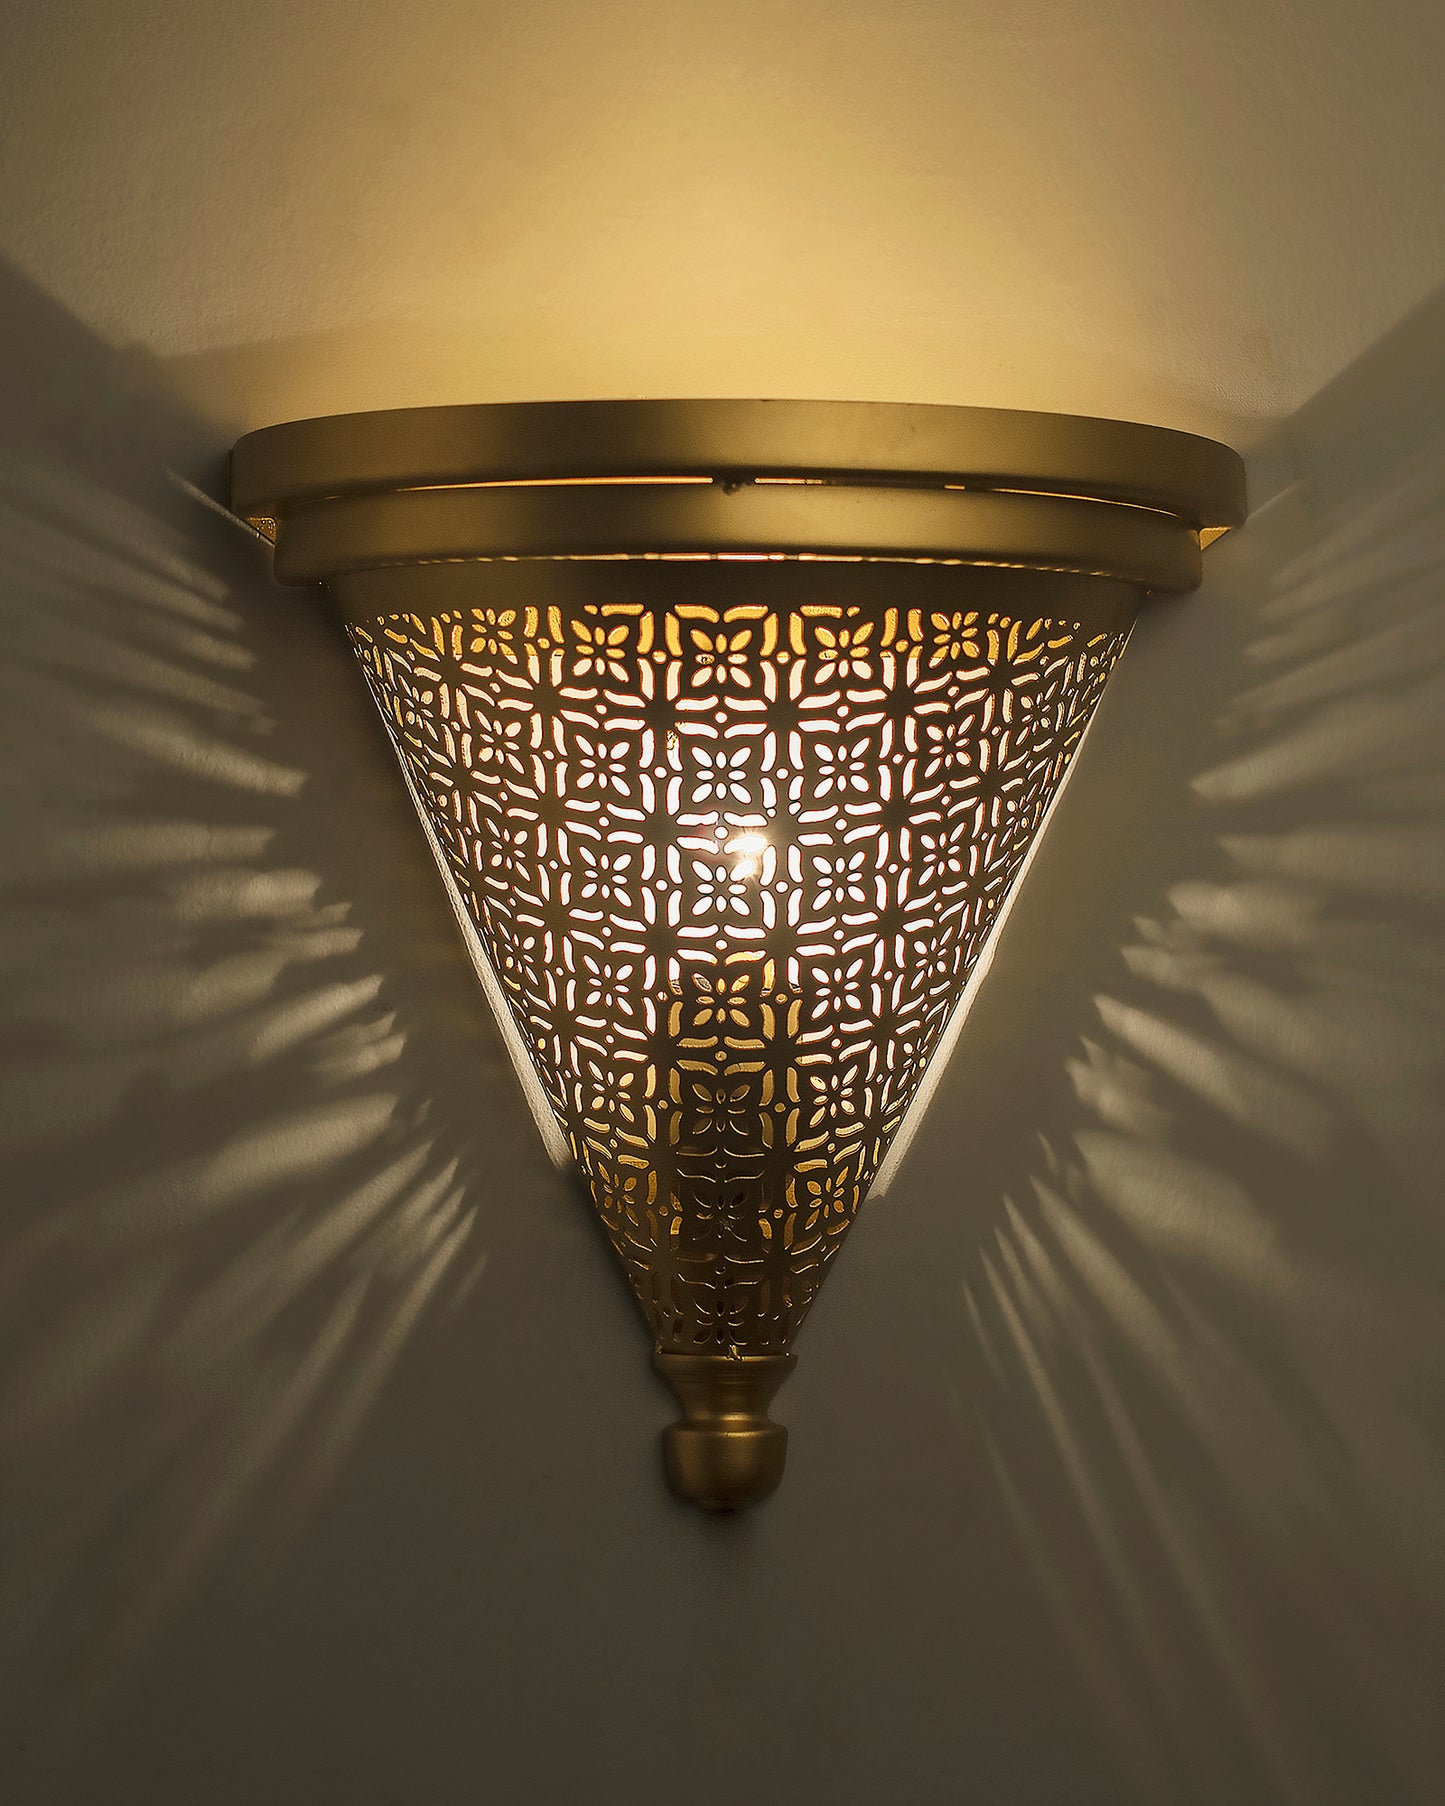 Moroccan Wall Trophy Cube Pattern Light shades, Engraved Wall Sconce Light, Antique Handmade